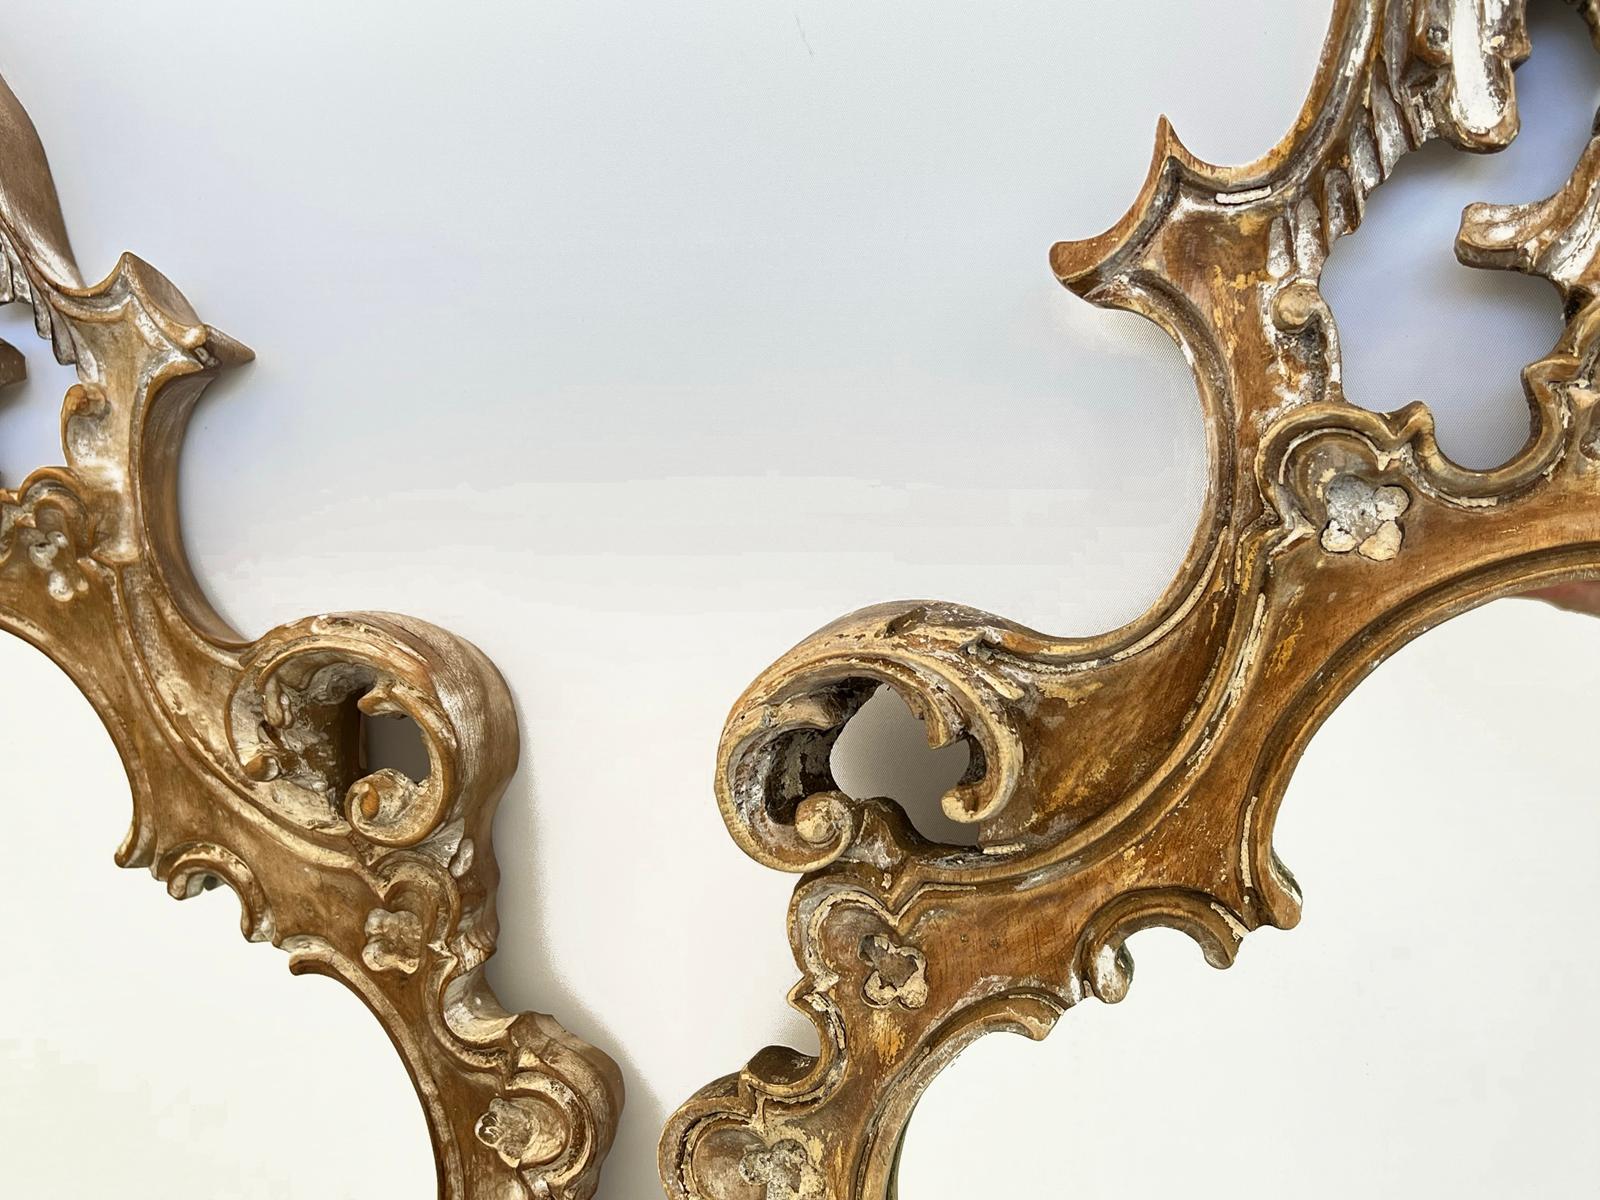 Pair of Vintage, Carved Wood, Italian Mirrors with Pickled Finish 1